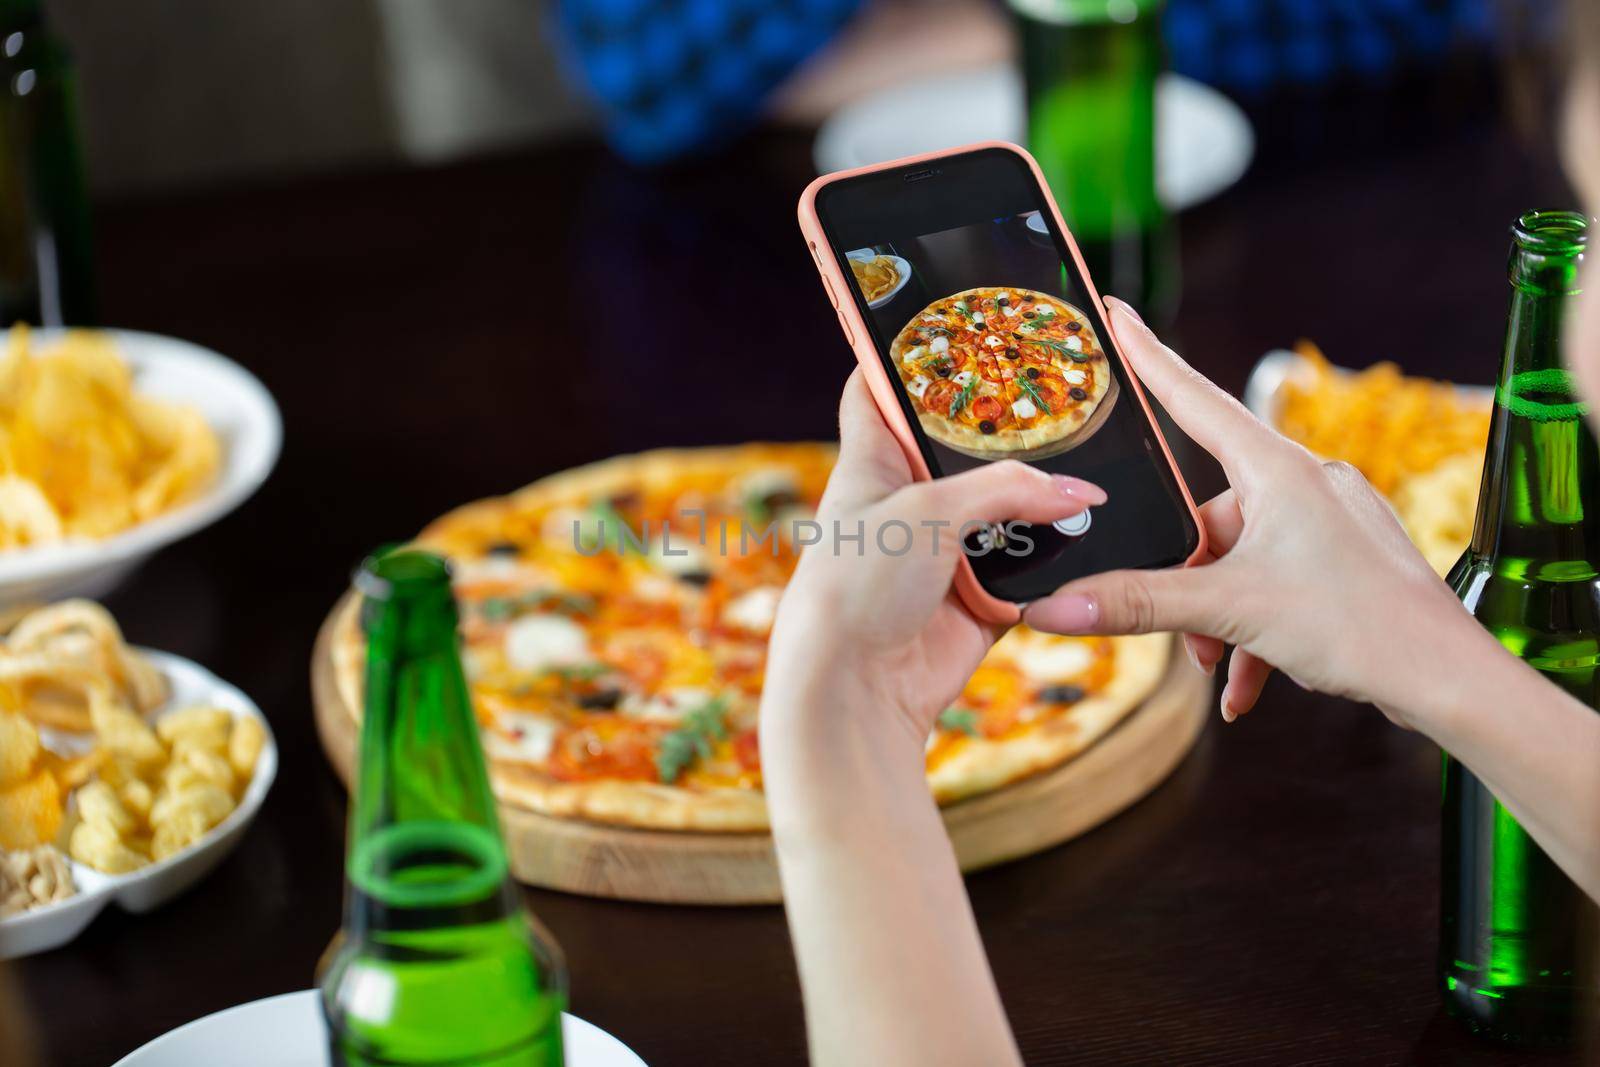 Woman taking photo of pizza with smart phone